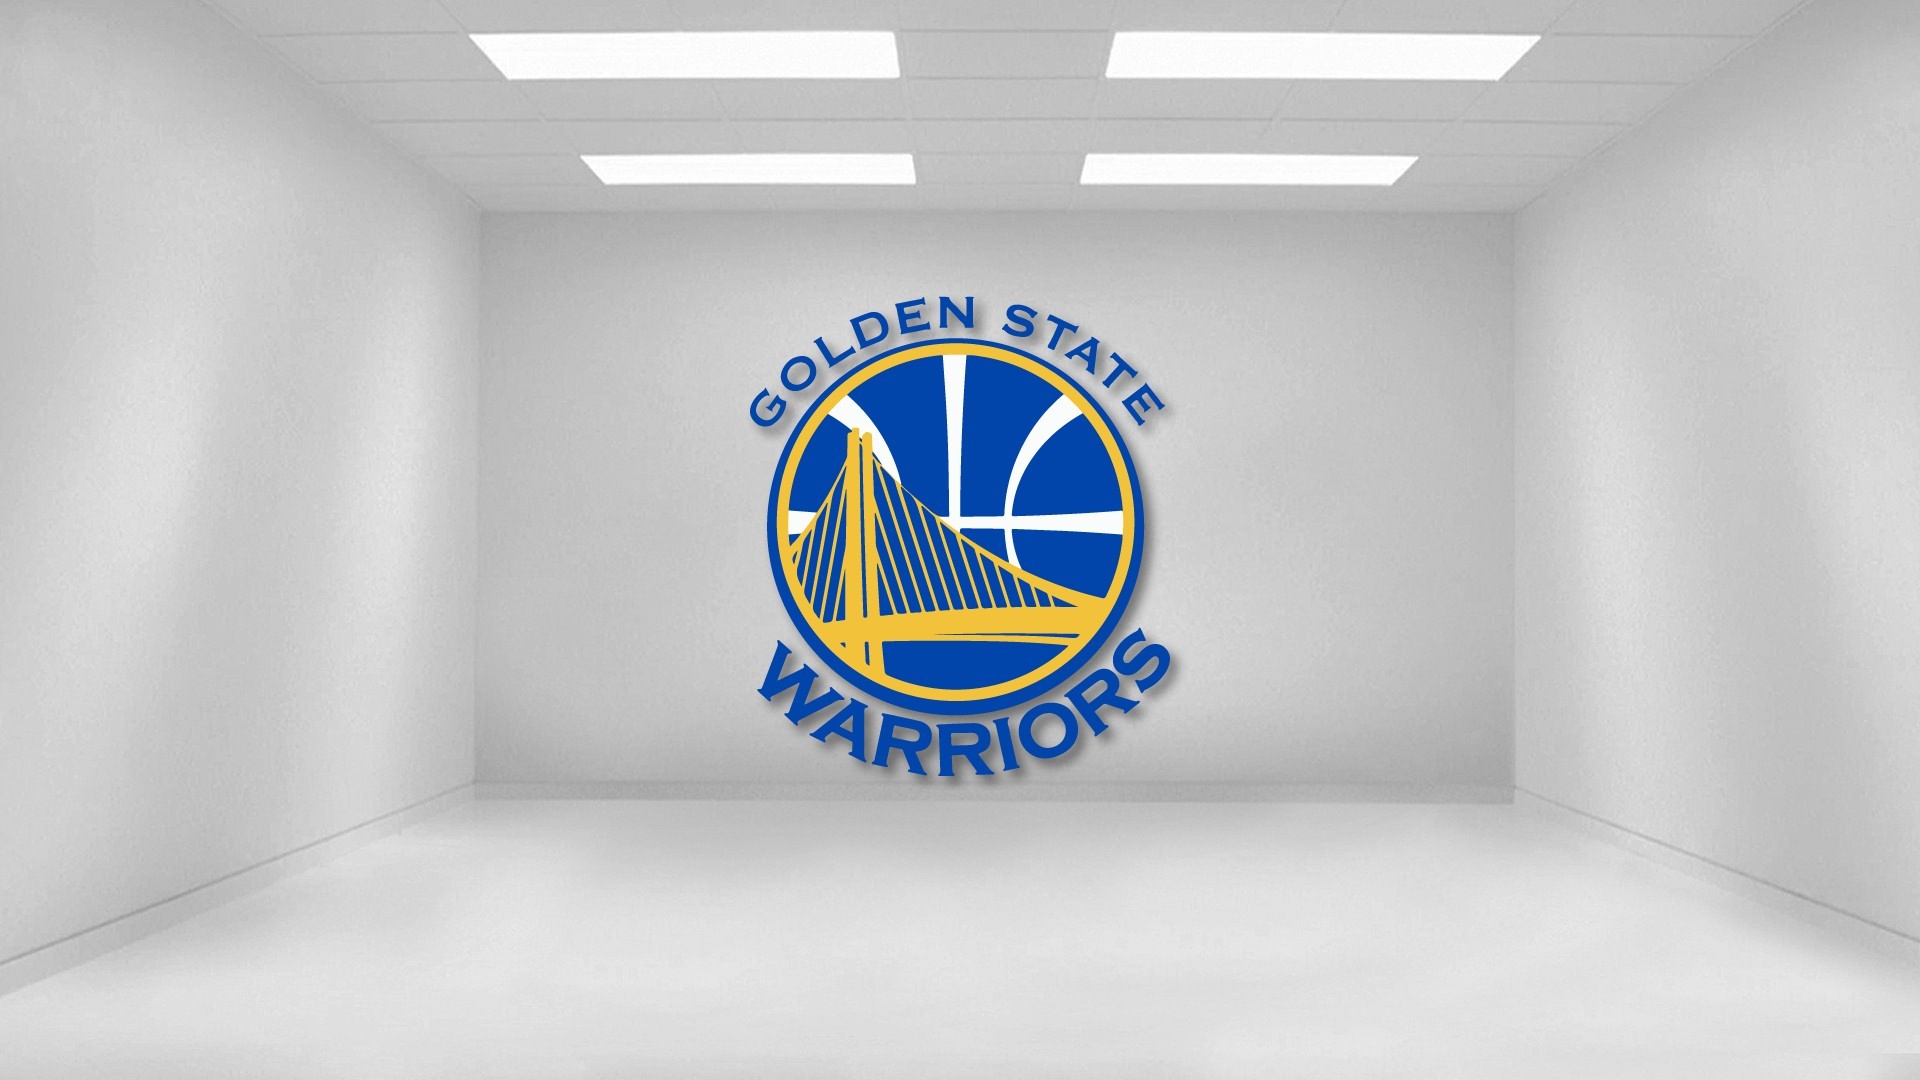 1920x1080 Golden State Warriors HD Wallpaper with image resolution  pixel.  You can make this wallpaper